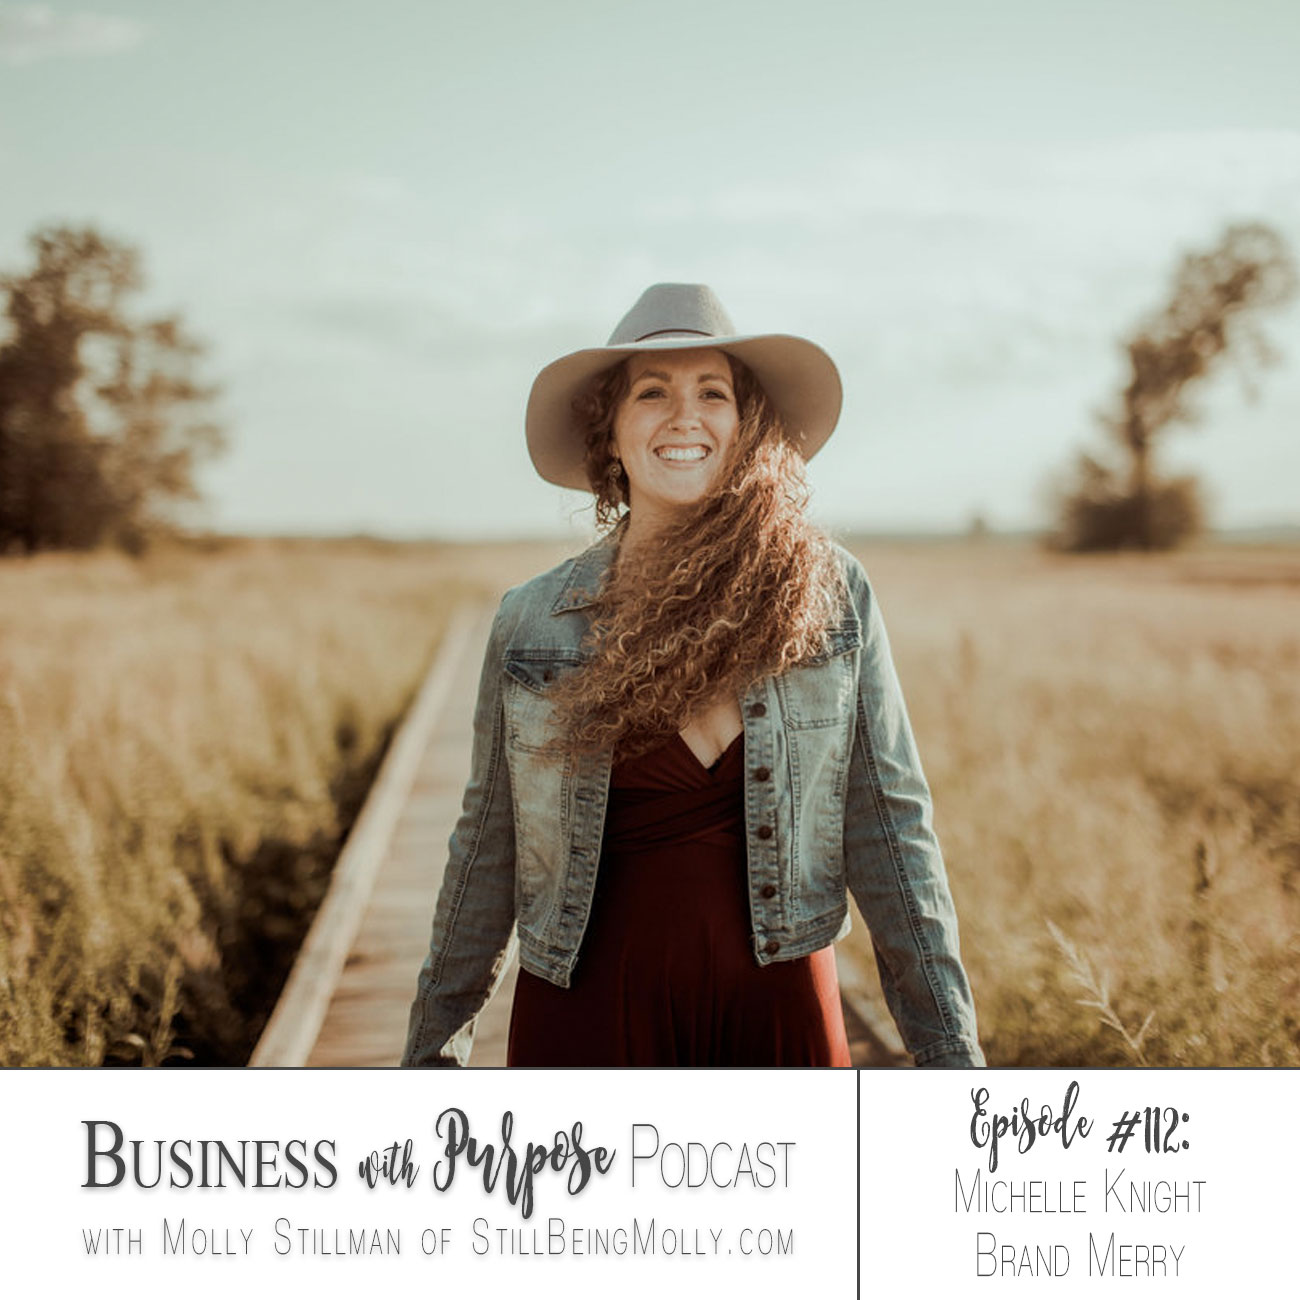 Business with Purpose Podcast EP 112: Michelle Knight, Brandmerry